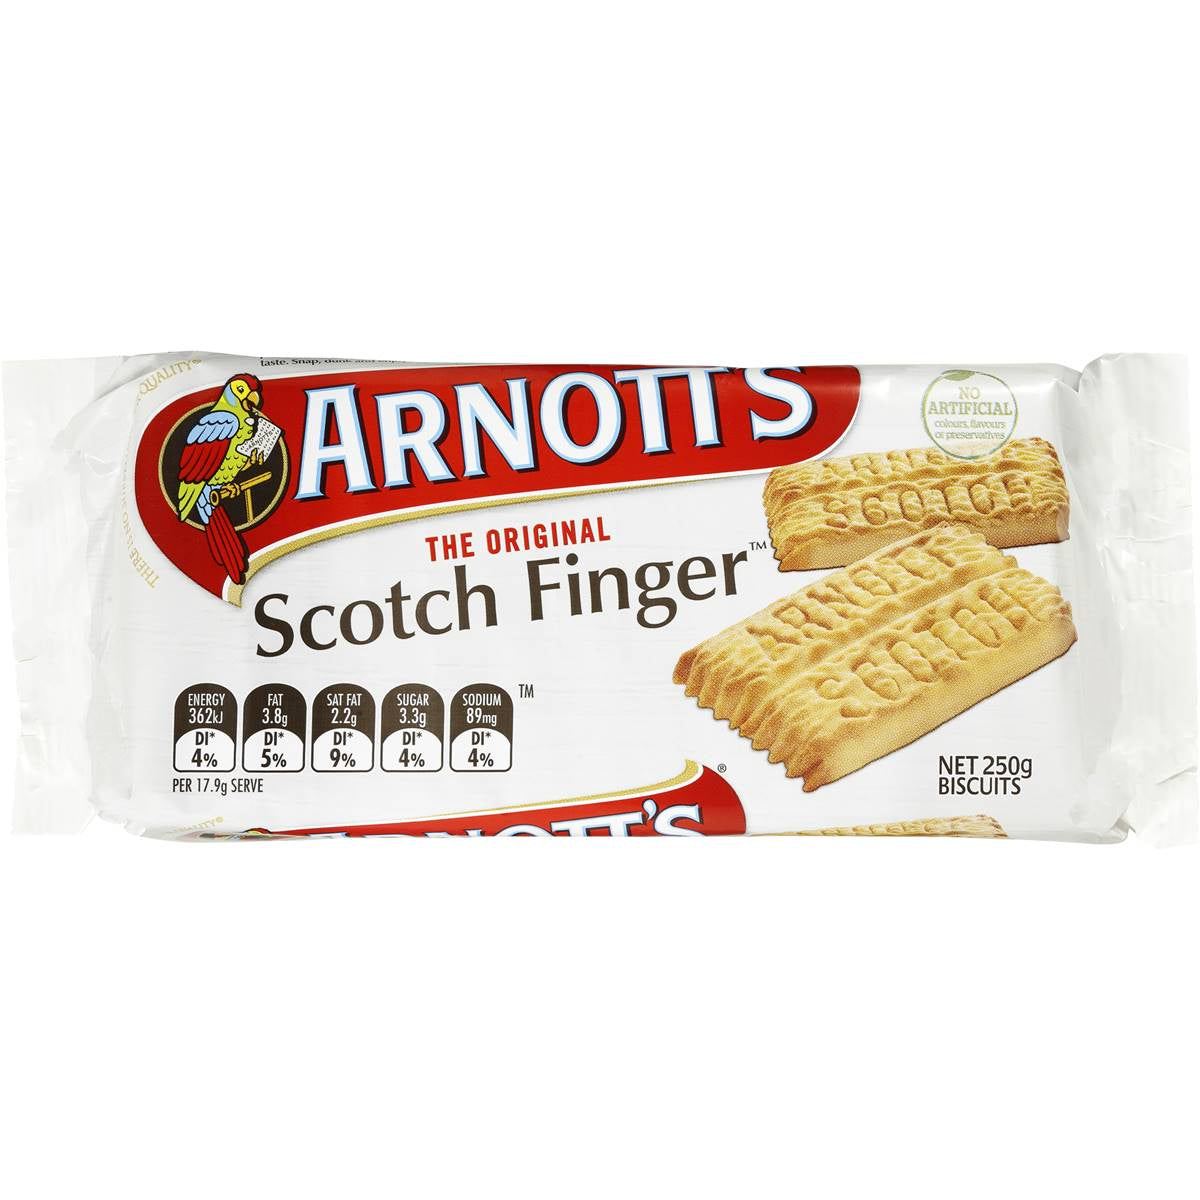 Arnotts Scotch Finger Biscuits 250g